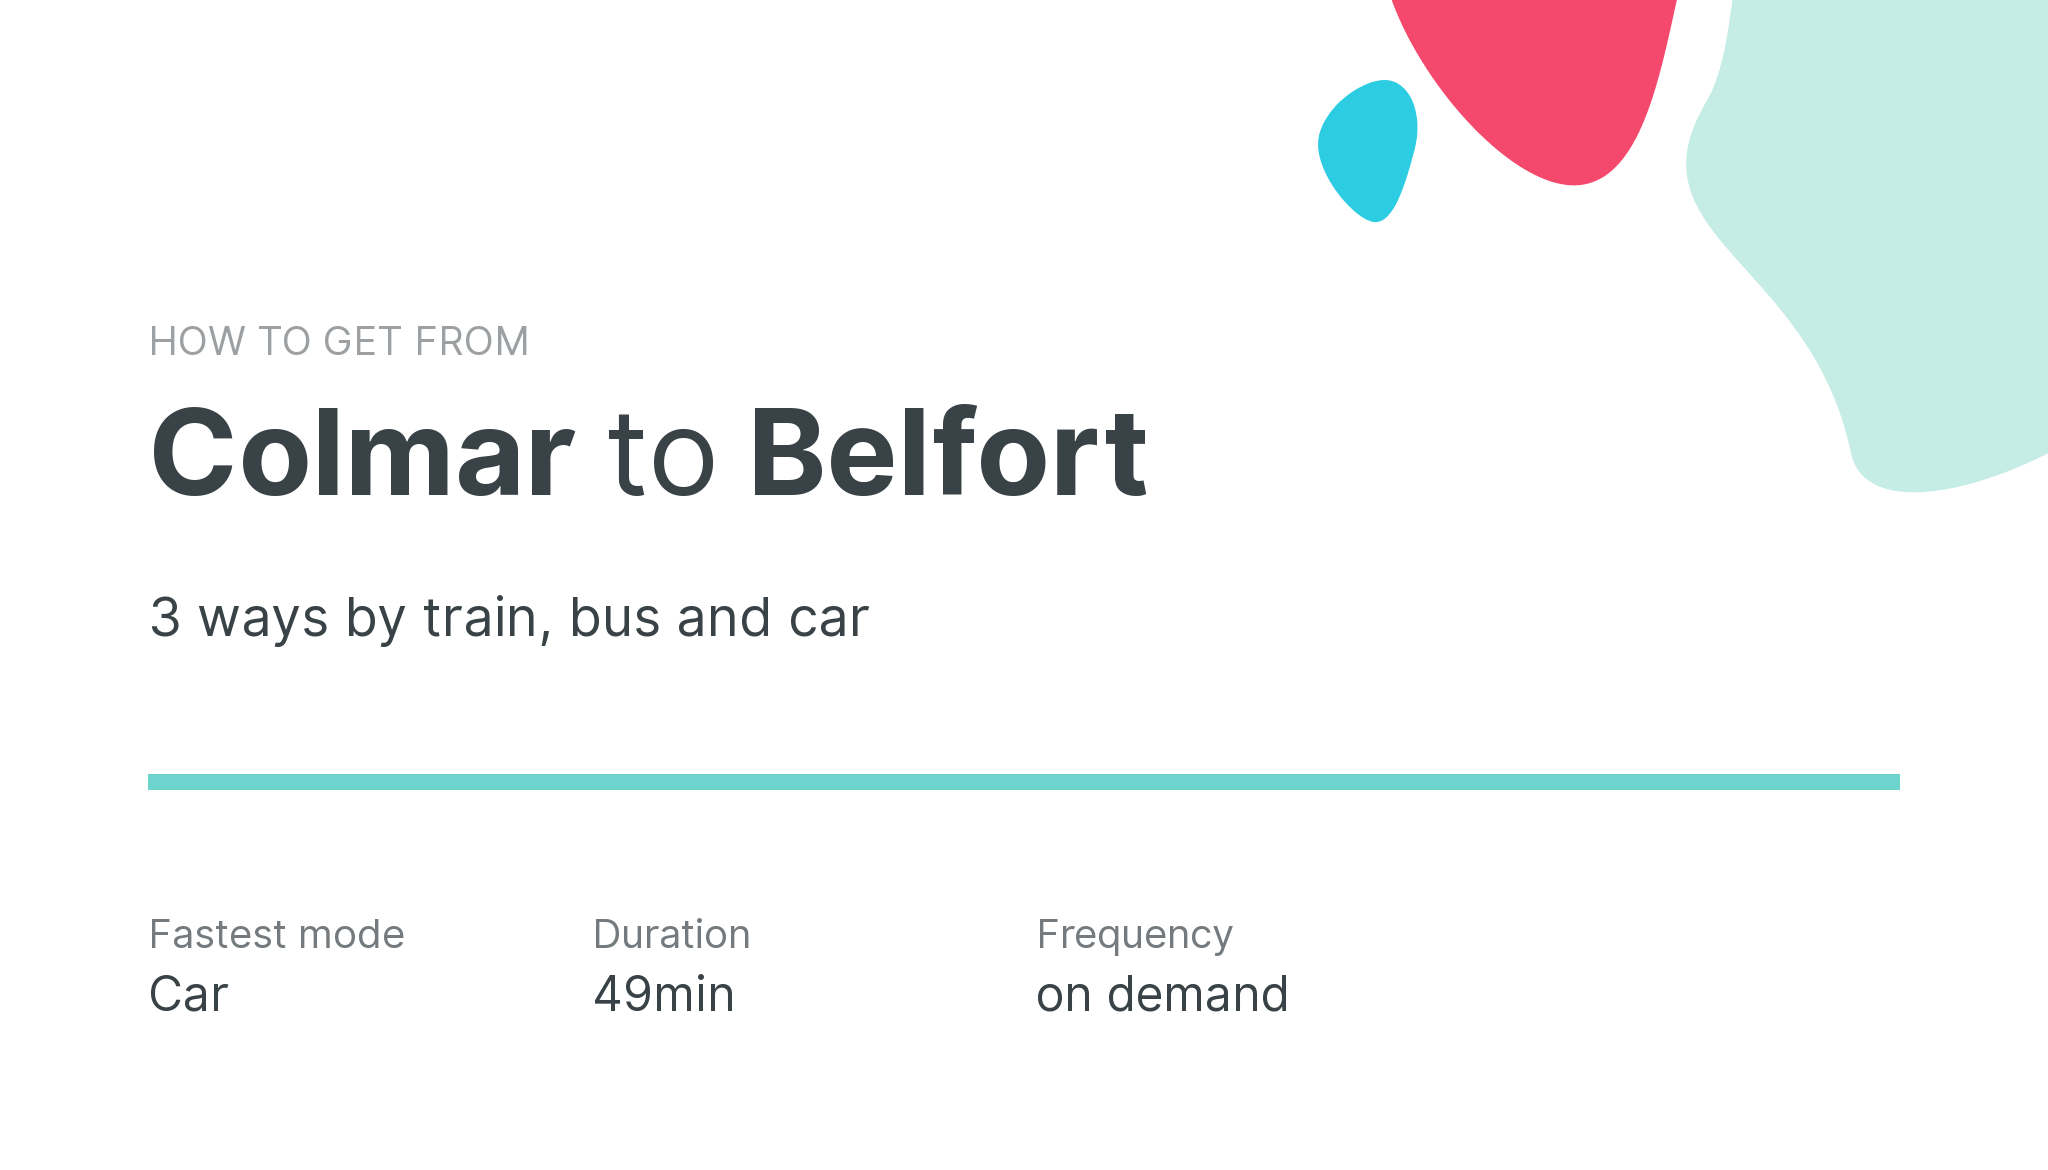 How do I get from Colmar to Belfort